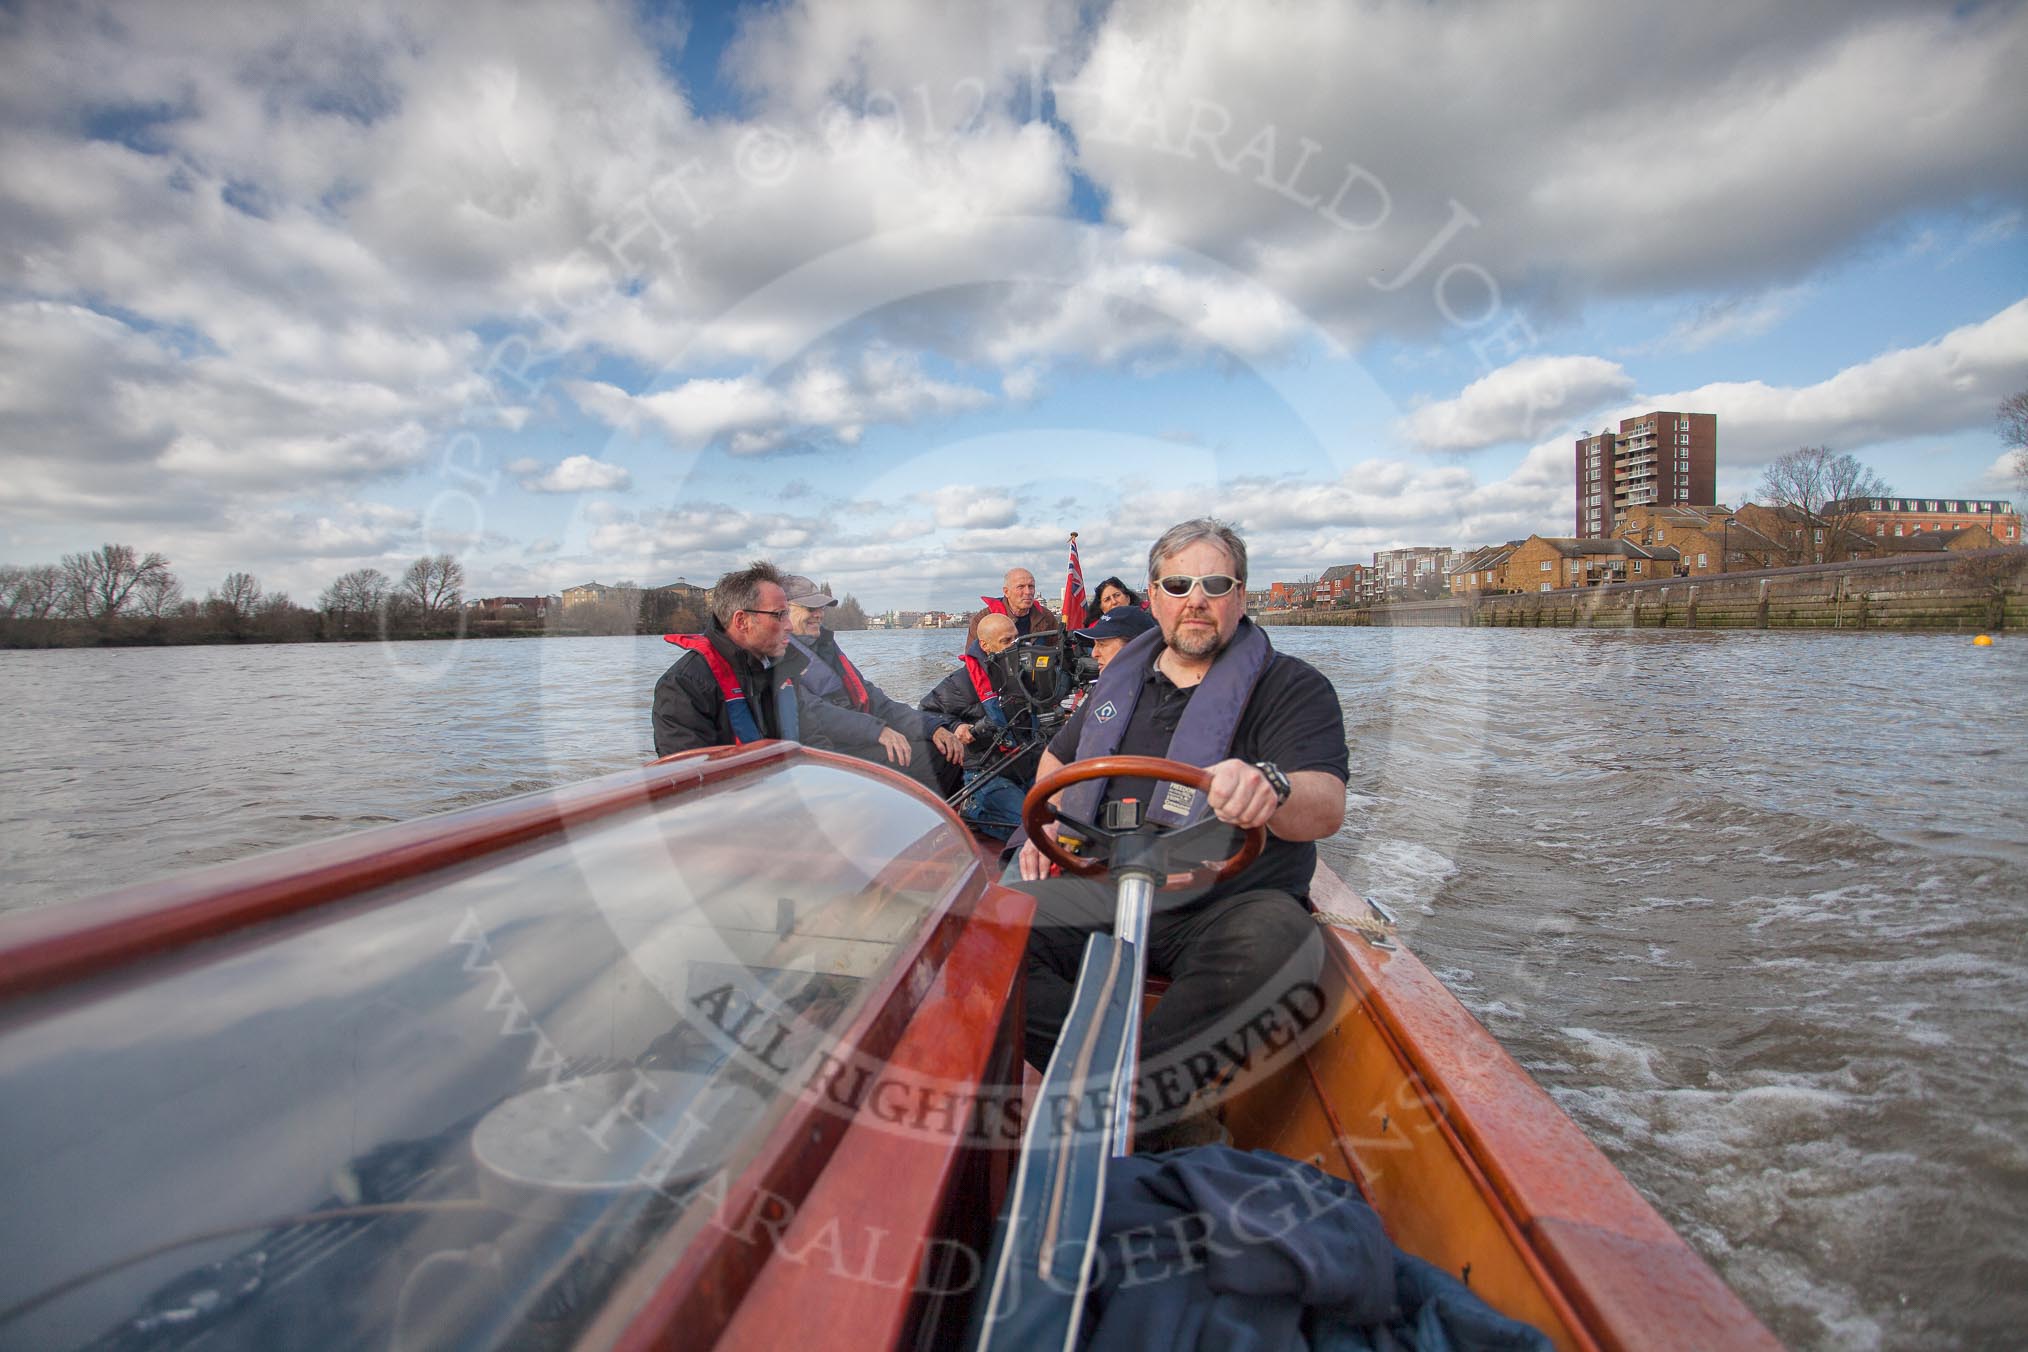 The Boat Race season 2012 - fixture CUBC vs Leander: The press launch, carrying photographers and television crews, returning to base after the CUBC vs Leander fixture. The Mile Post is on the left, and Surrey Bend in the background..
River Thames between Putney and Molesey,
London,
Greater London,
United Kingdom,
on 10 March 2012 at 14:31, image #153